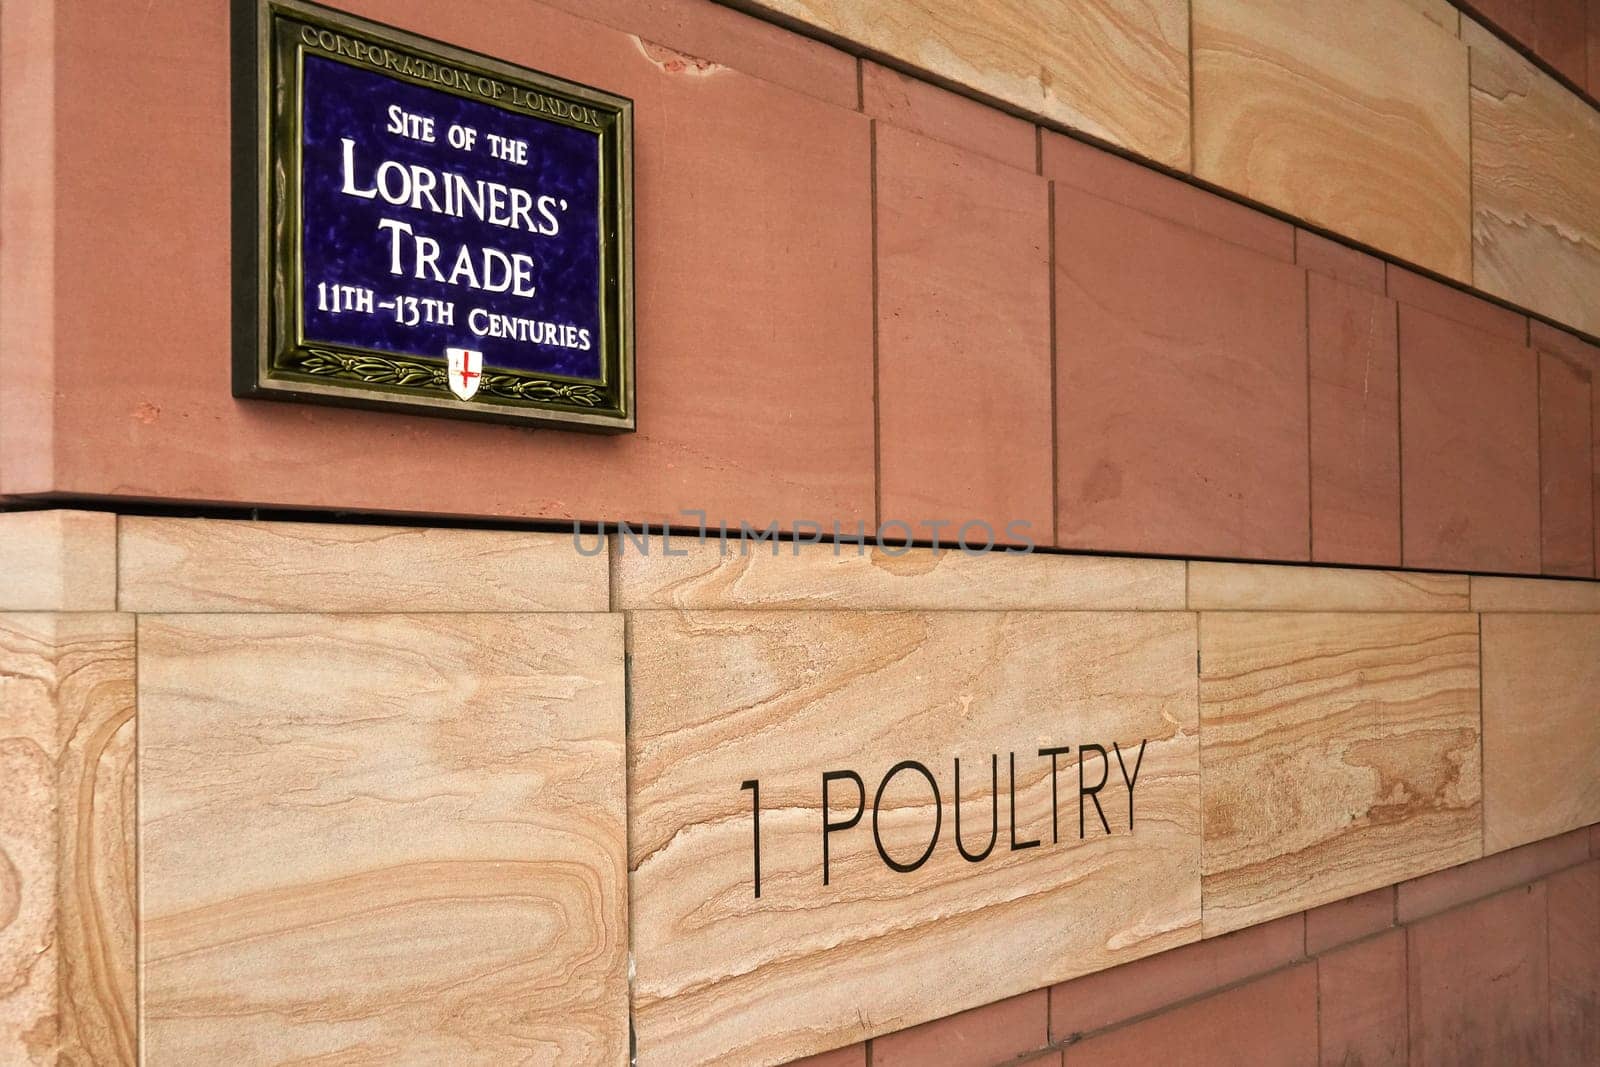 London, United Kingdom - February 02, 2019: Site of Loriners' Trade sign on the wall of No 1 Poultry in London by Ivanko